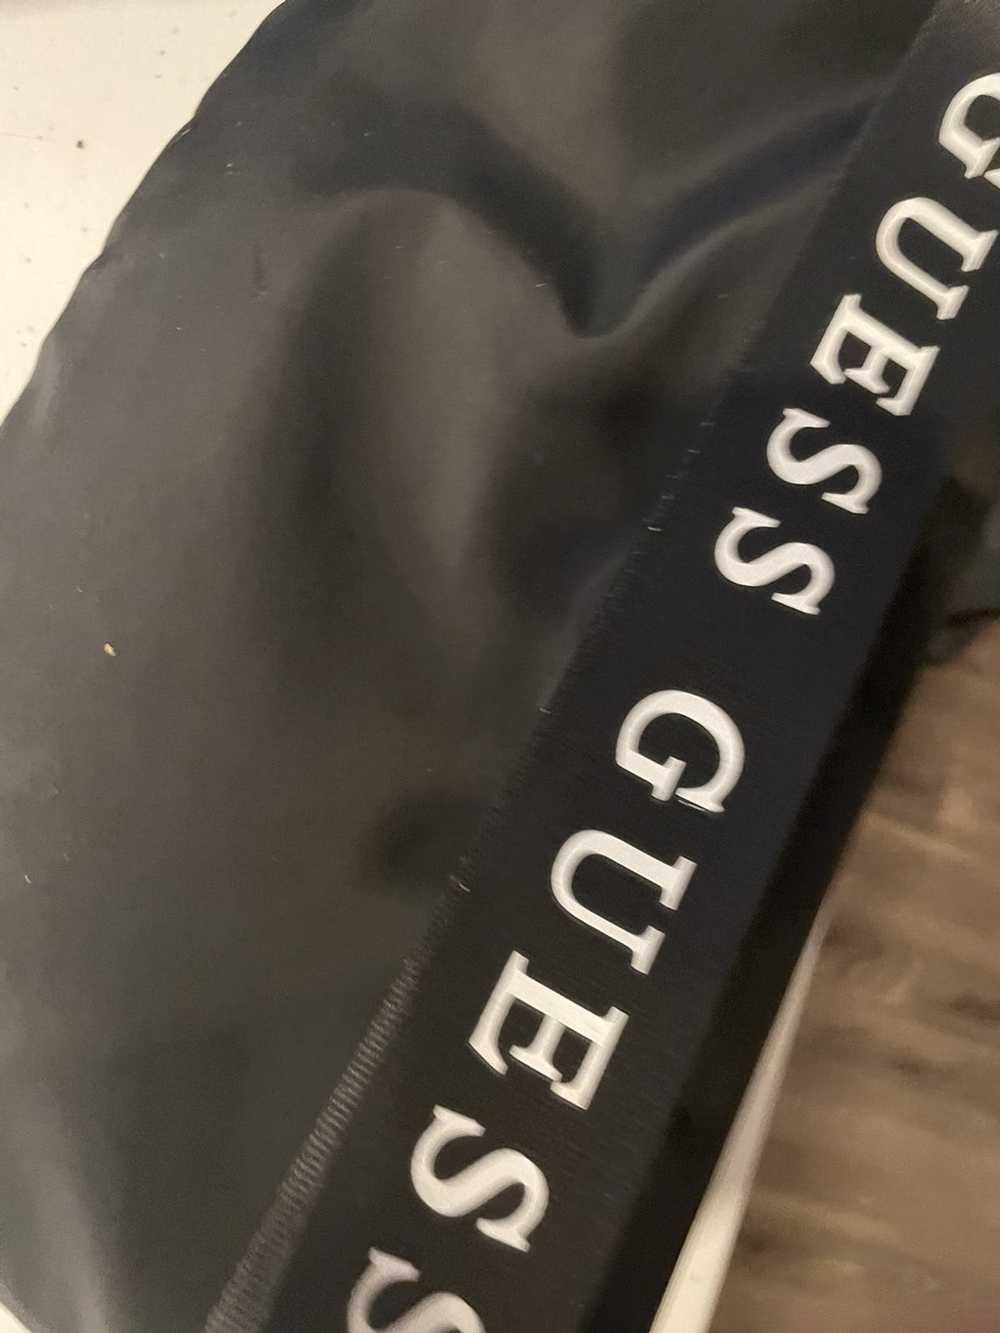 Guess Guess Fanny pack - image 2